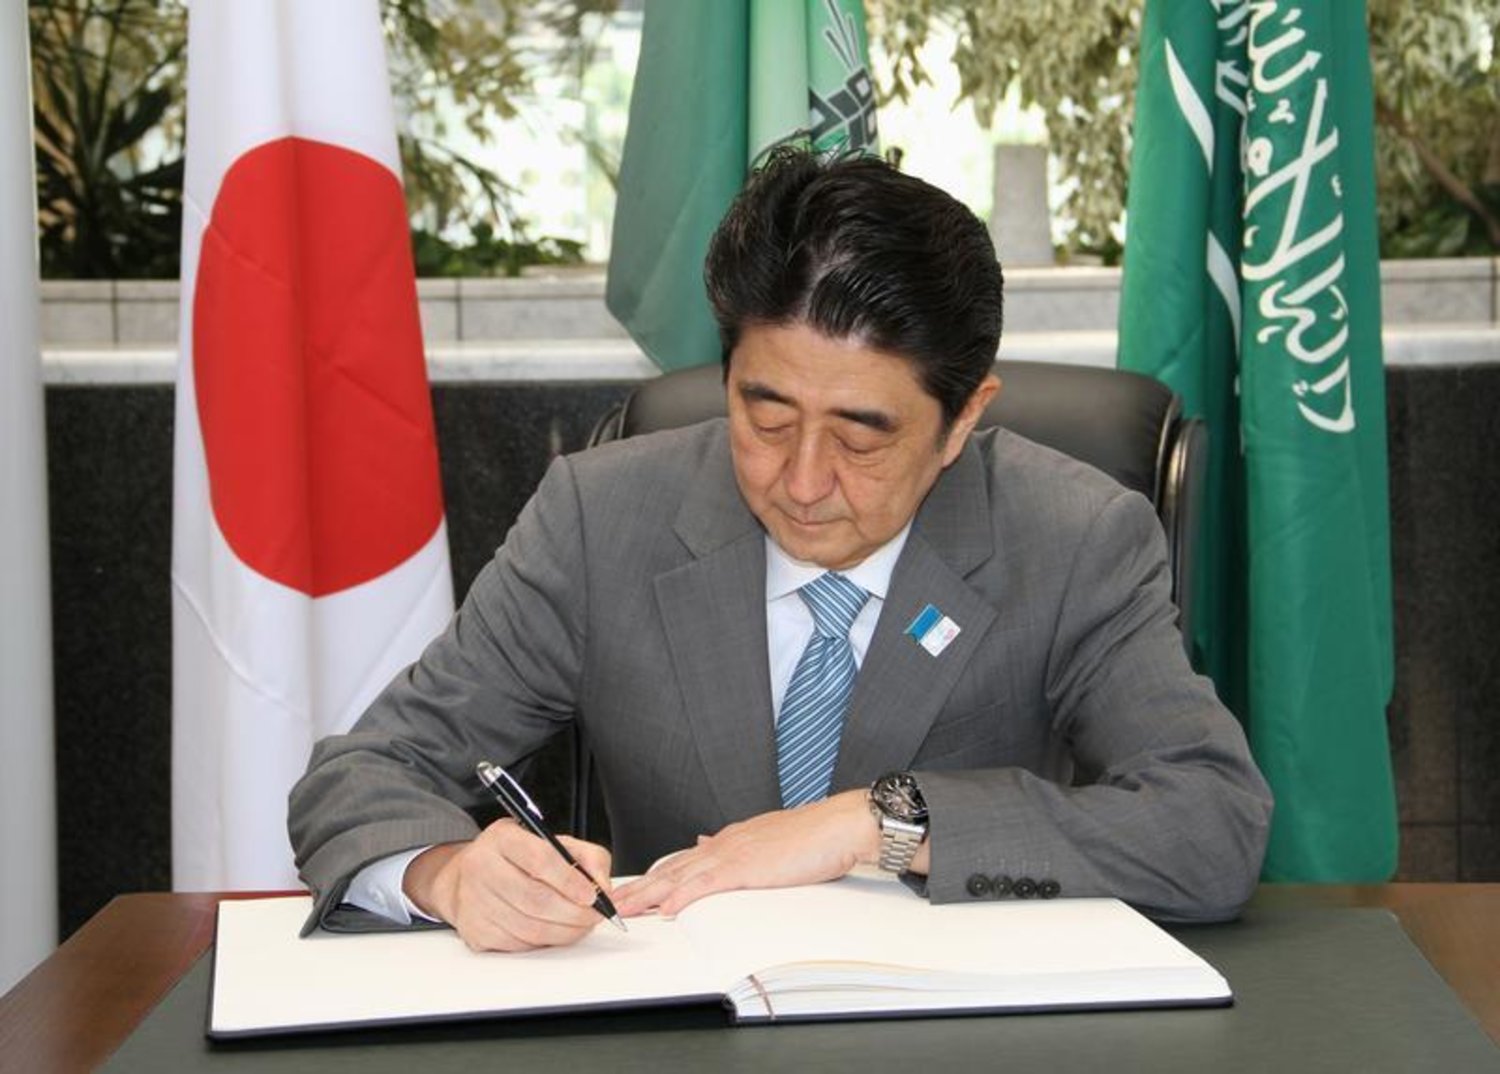 Japanese Prime Minister Shinzo Abe signs a business agreement after a conference at King Abdulaziz University in Jeddah, May 1, 2013. (Reuters)